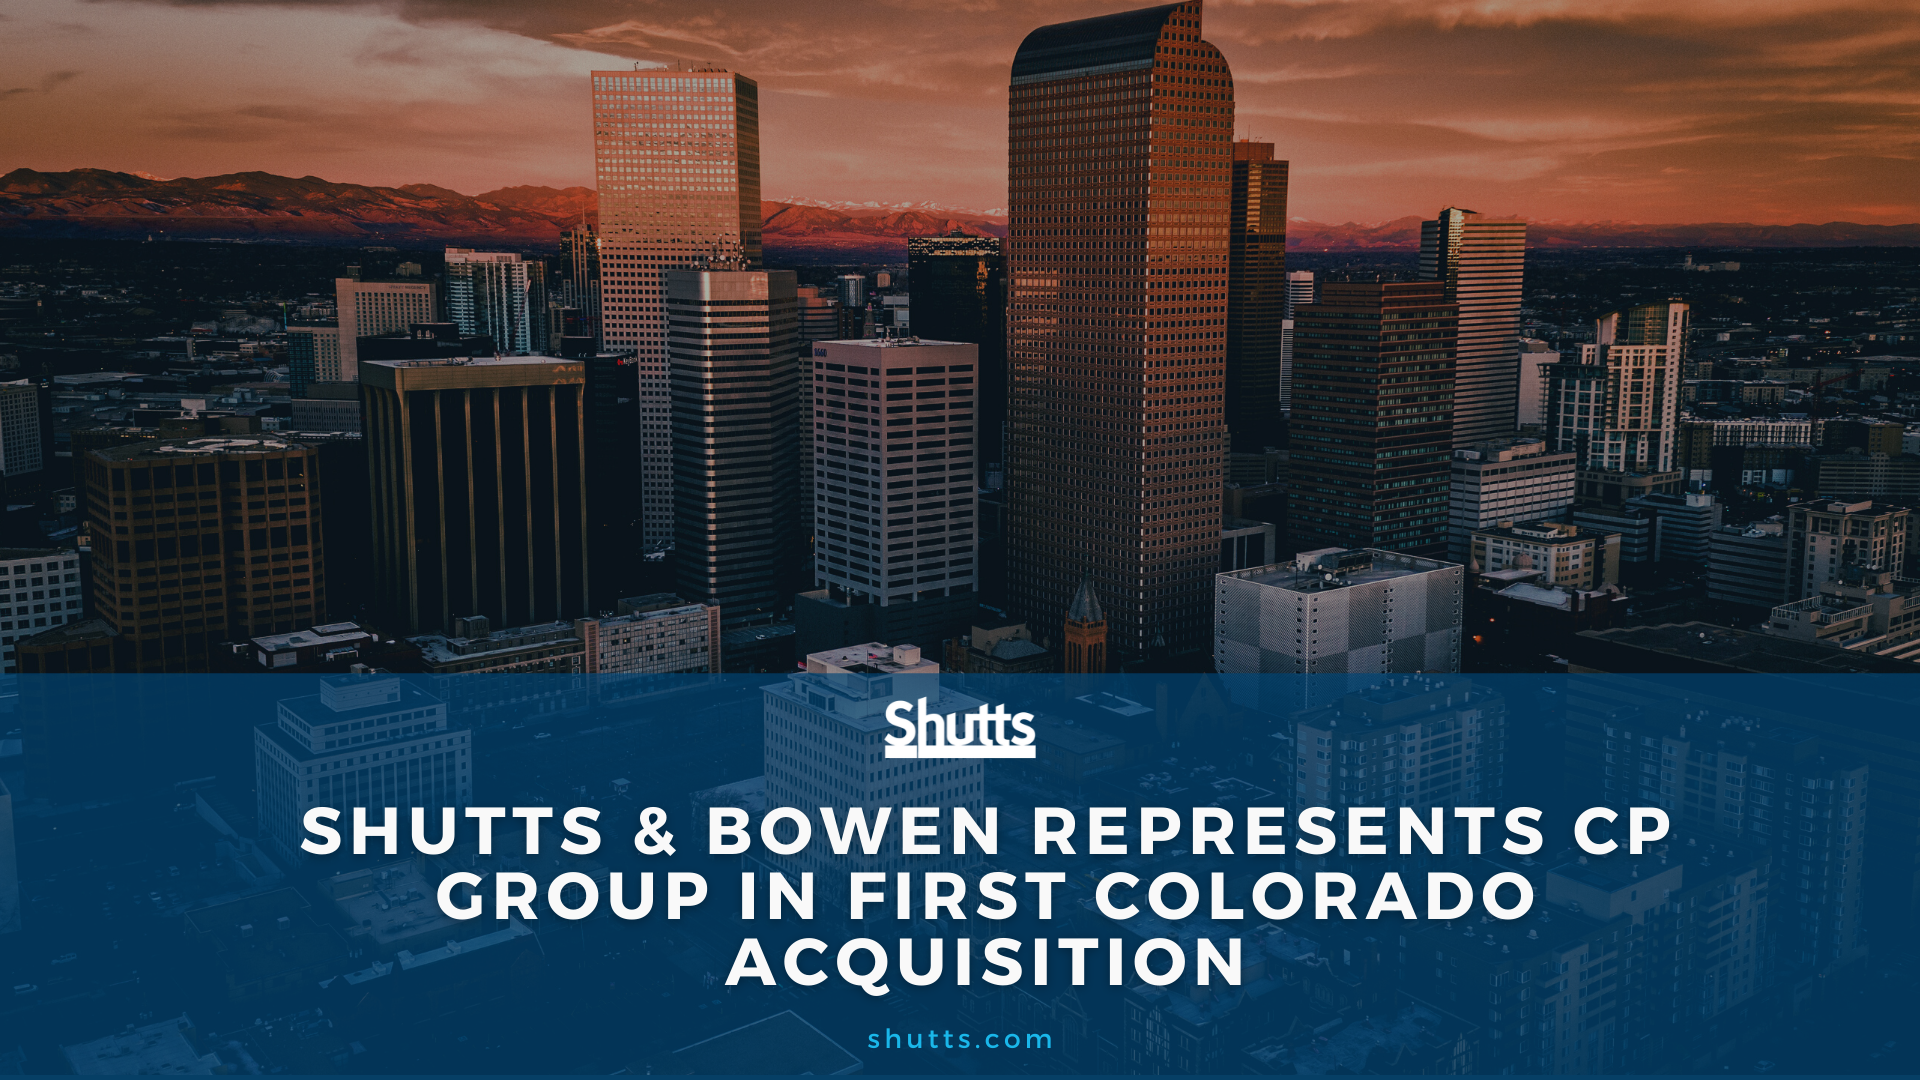 Shutts & Bowen Represents CP Group in First Colorado Acquisition